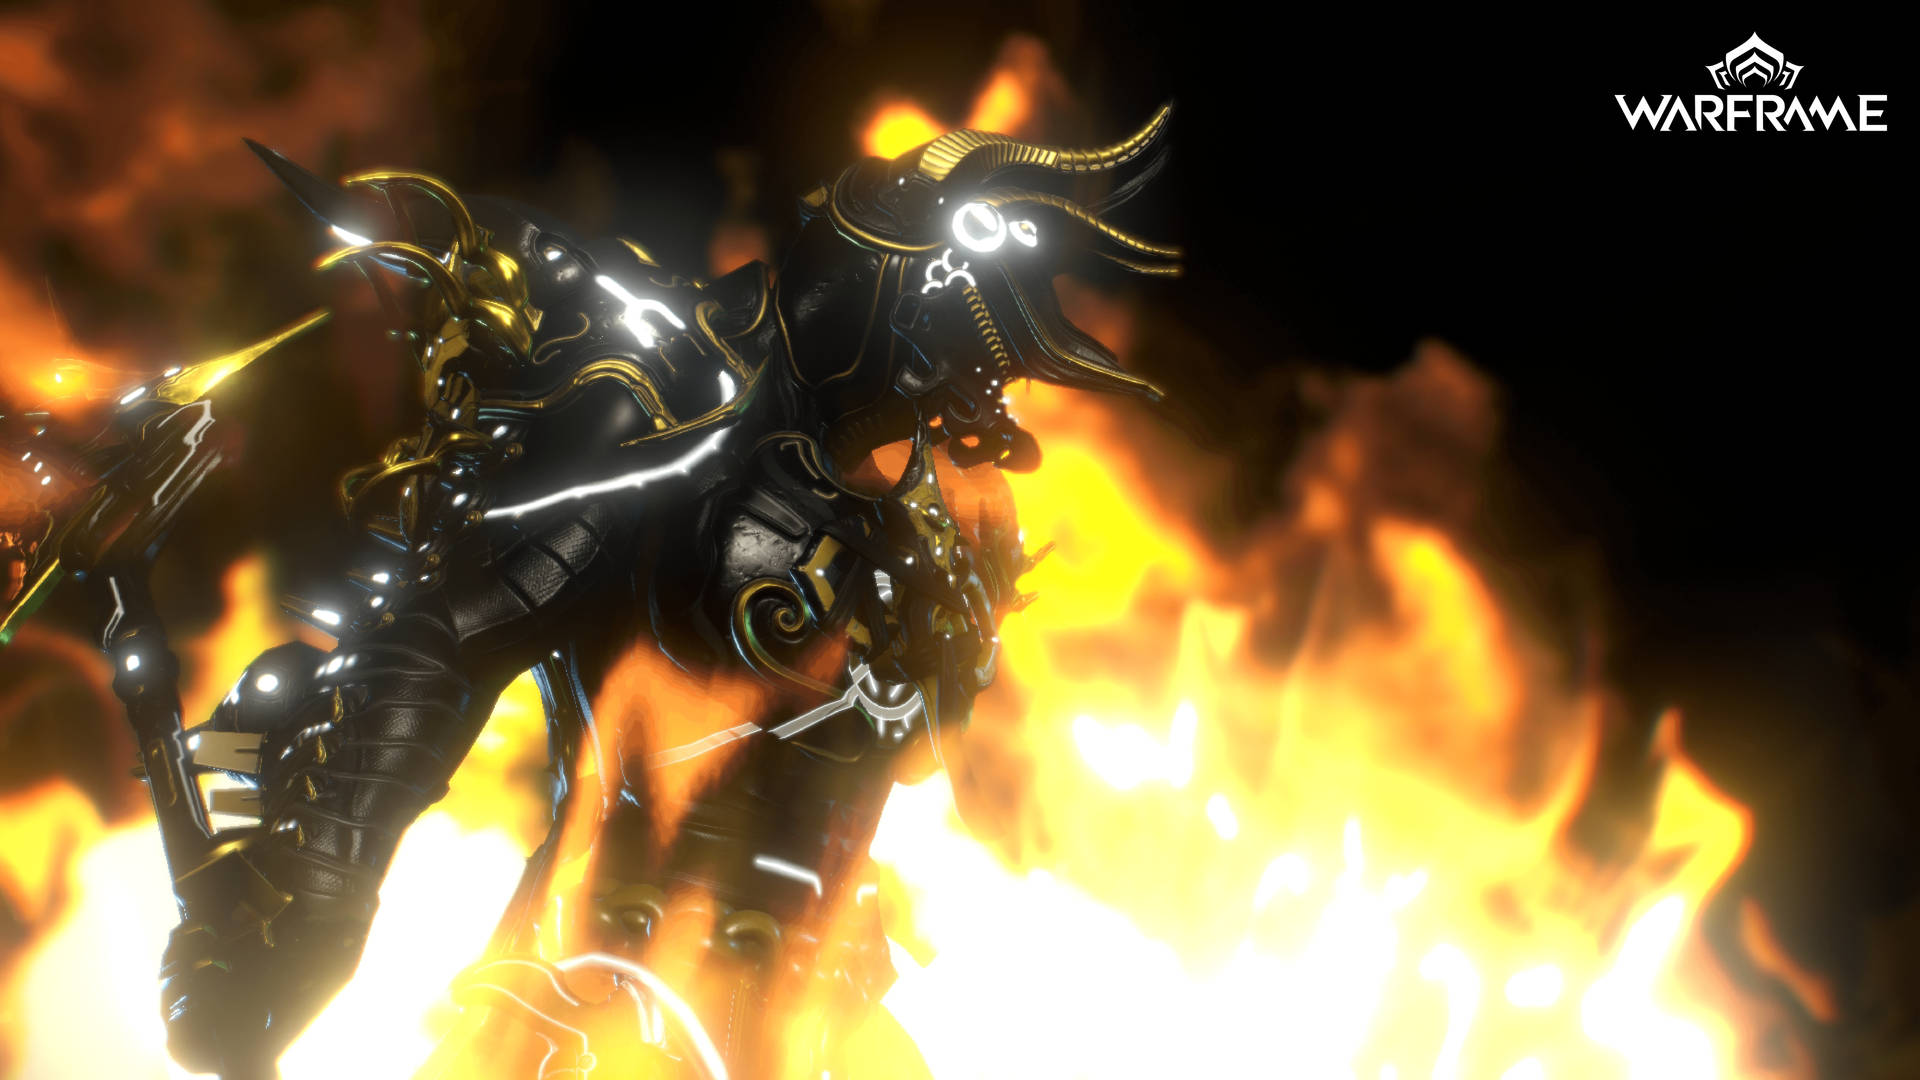 Warframe Tenno ancient soldier with black gold armored body consumed by a blazing fire wallpaper. 